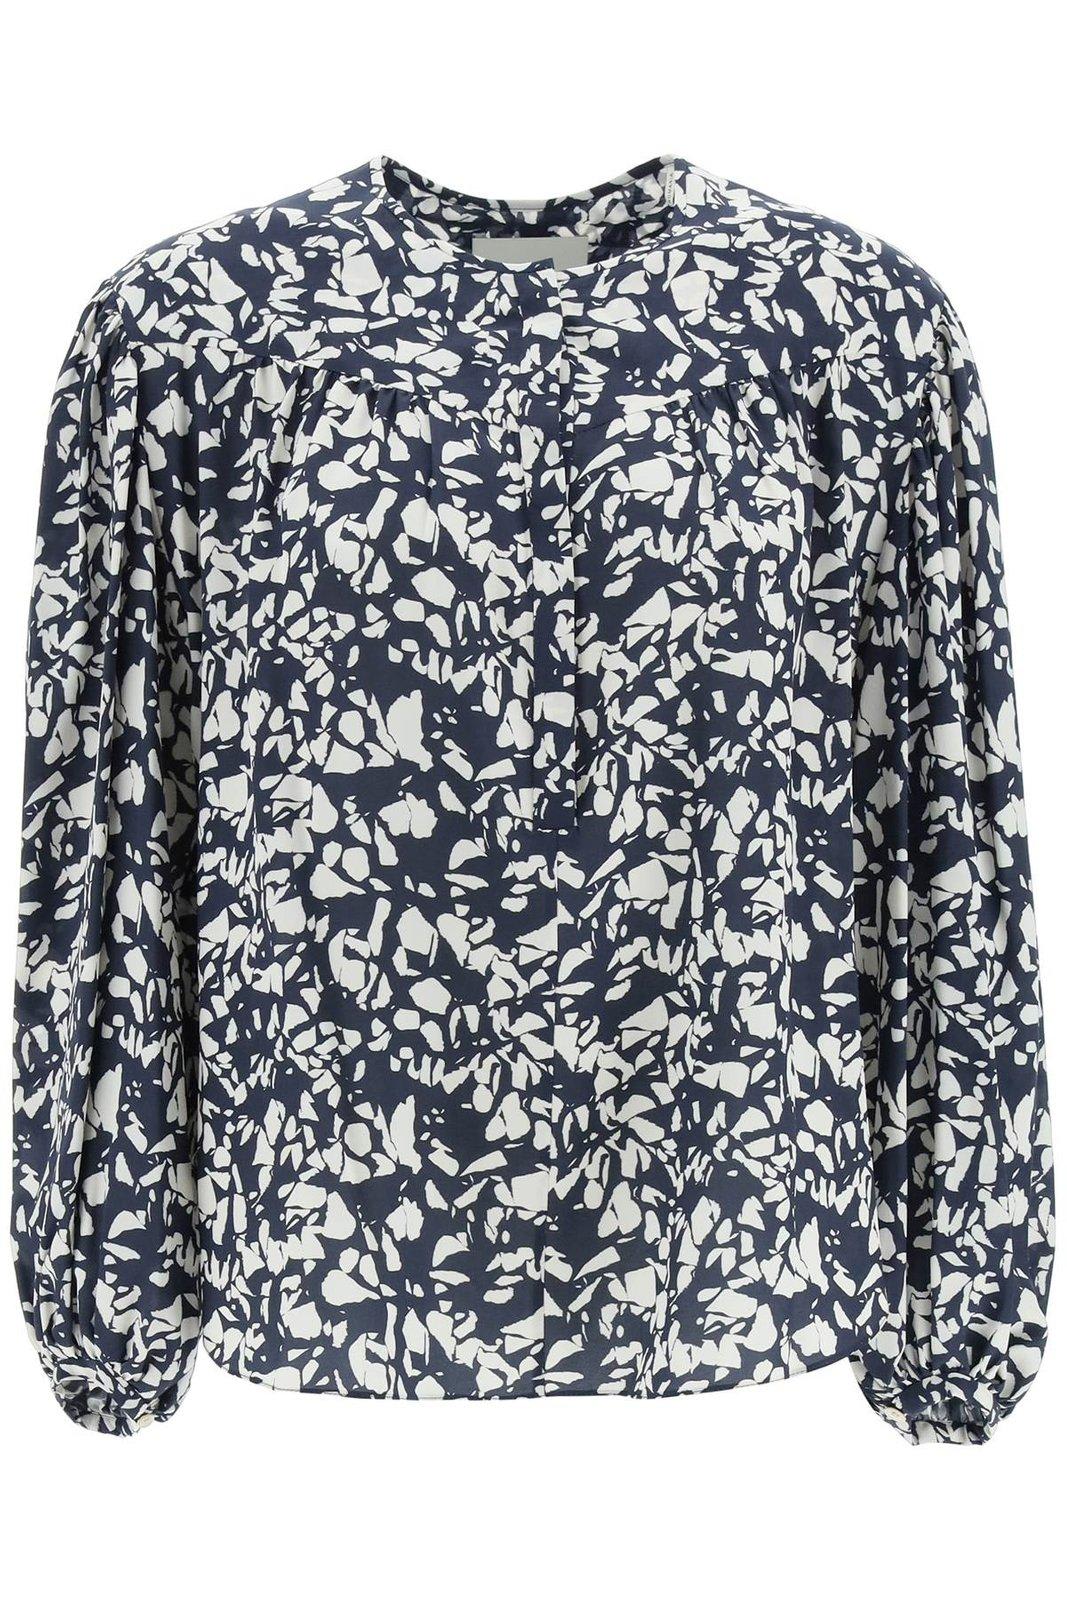 ISABEL MARANT ALLOVER PRINTED LONG-SLEEVED BLOUSE